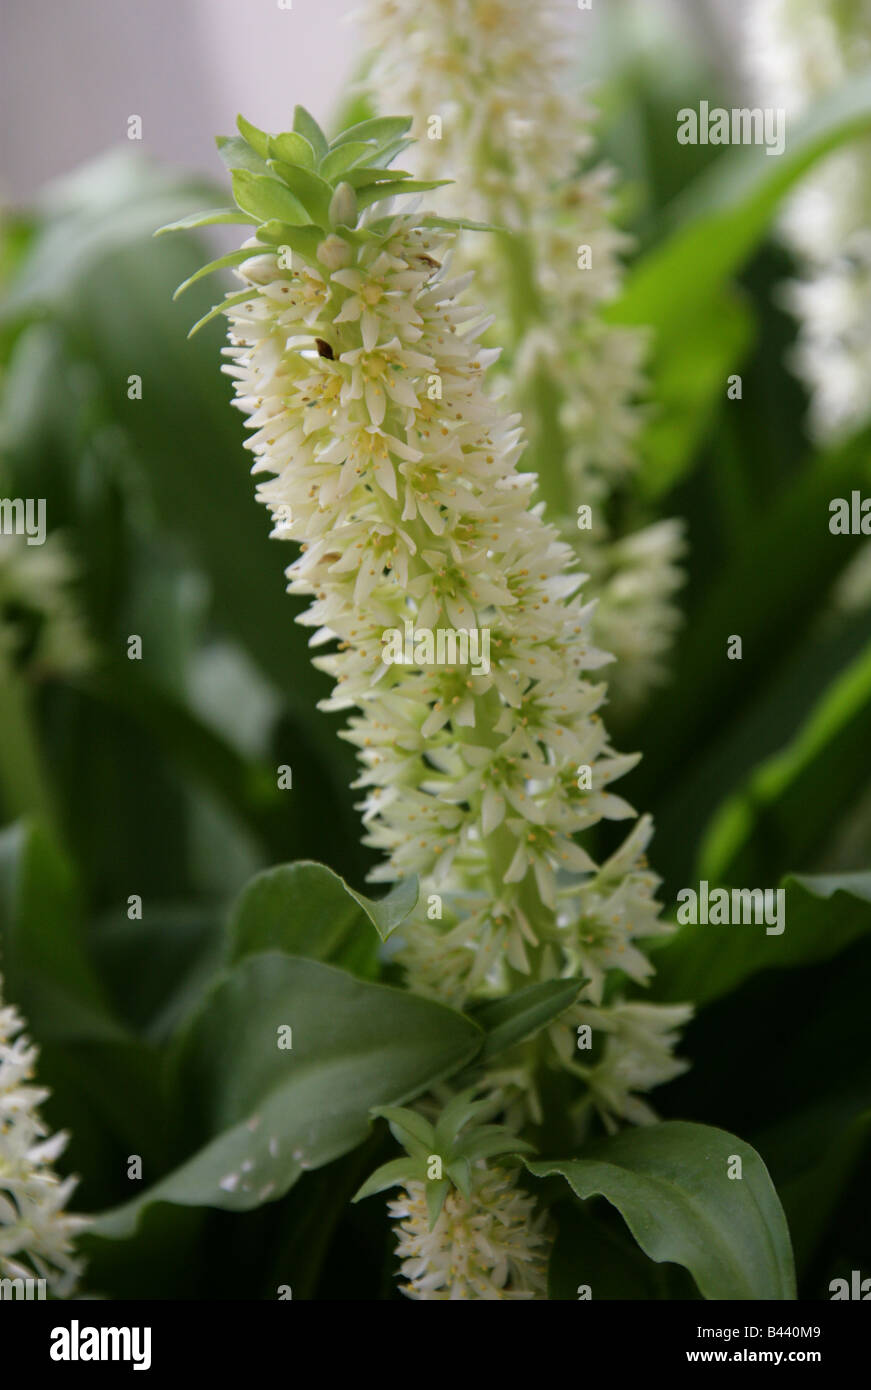 Pineapple Lily, Eucomis zambesiaca, Hyacinthaceae from the Highland Regions of Malawi, Africa Stock Photo